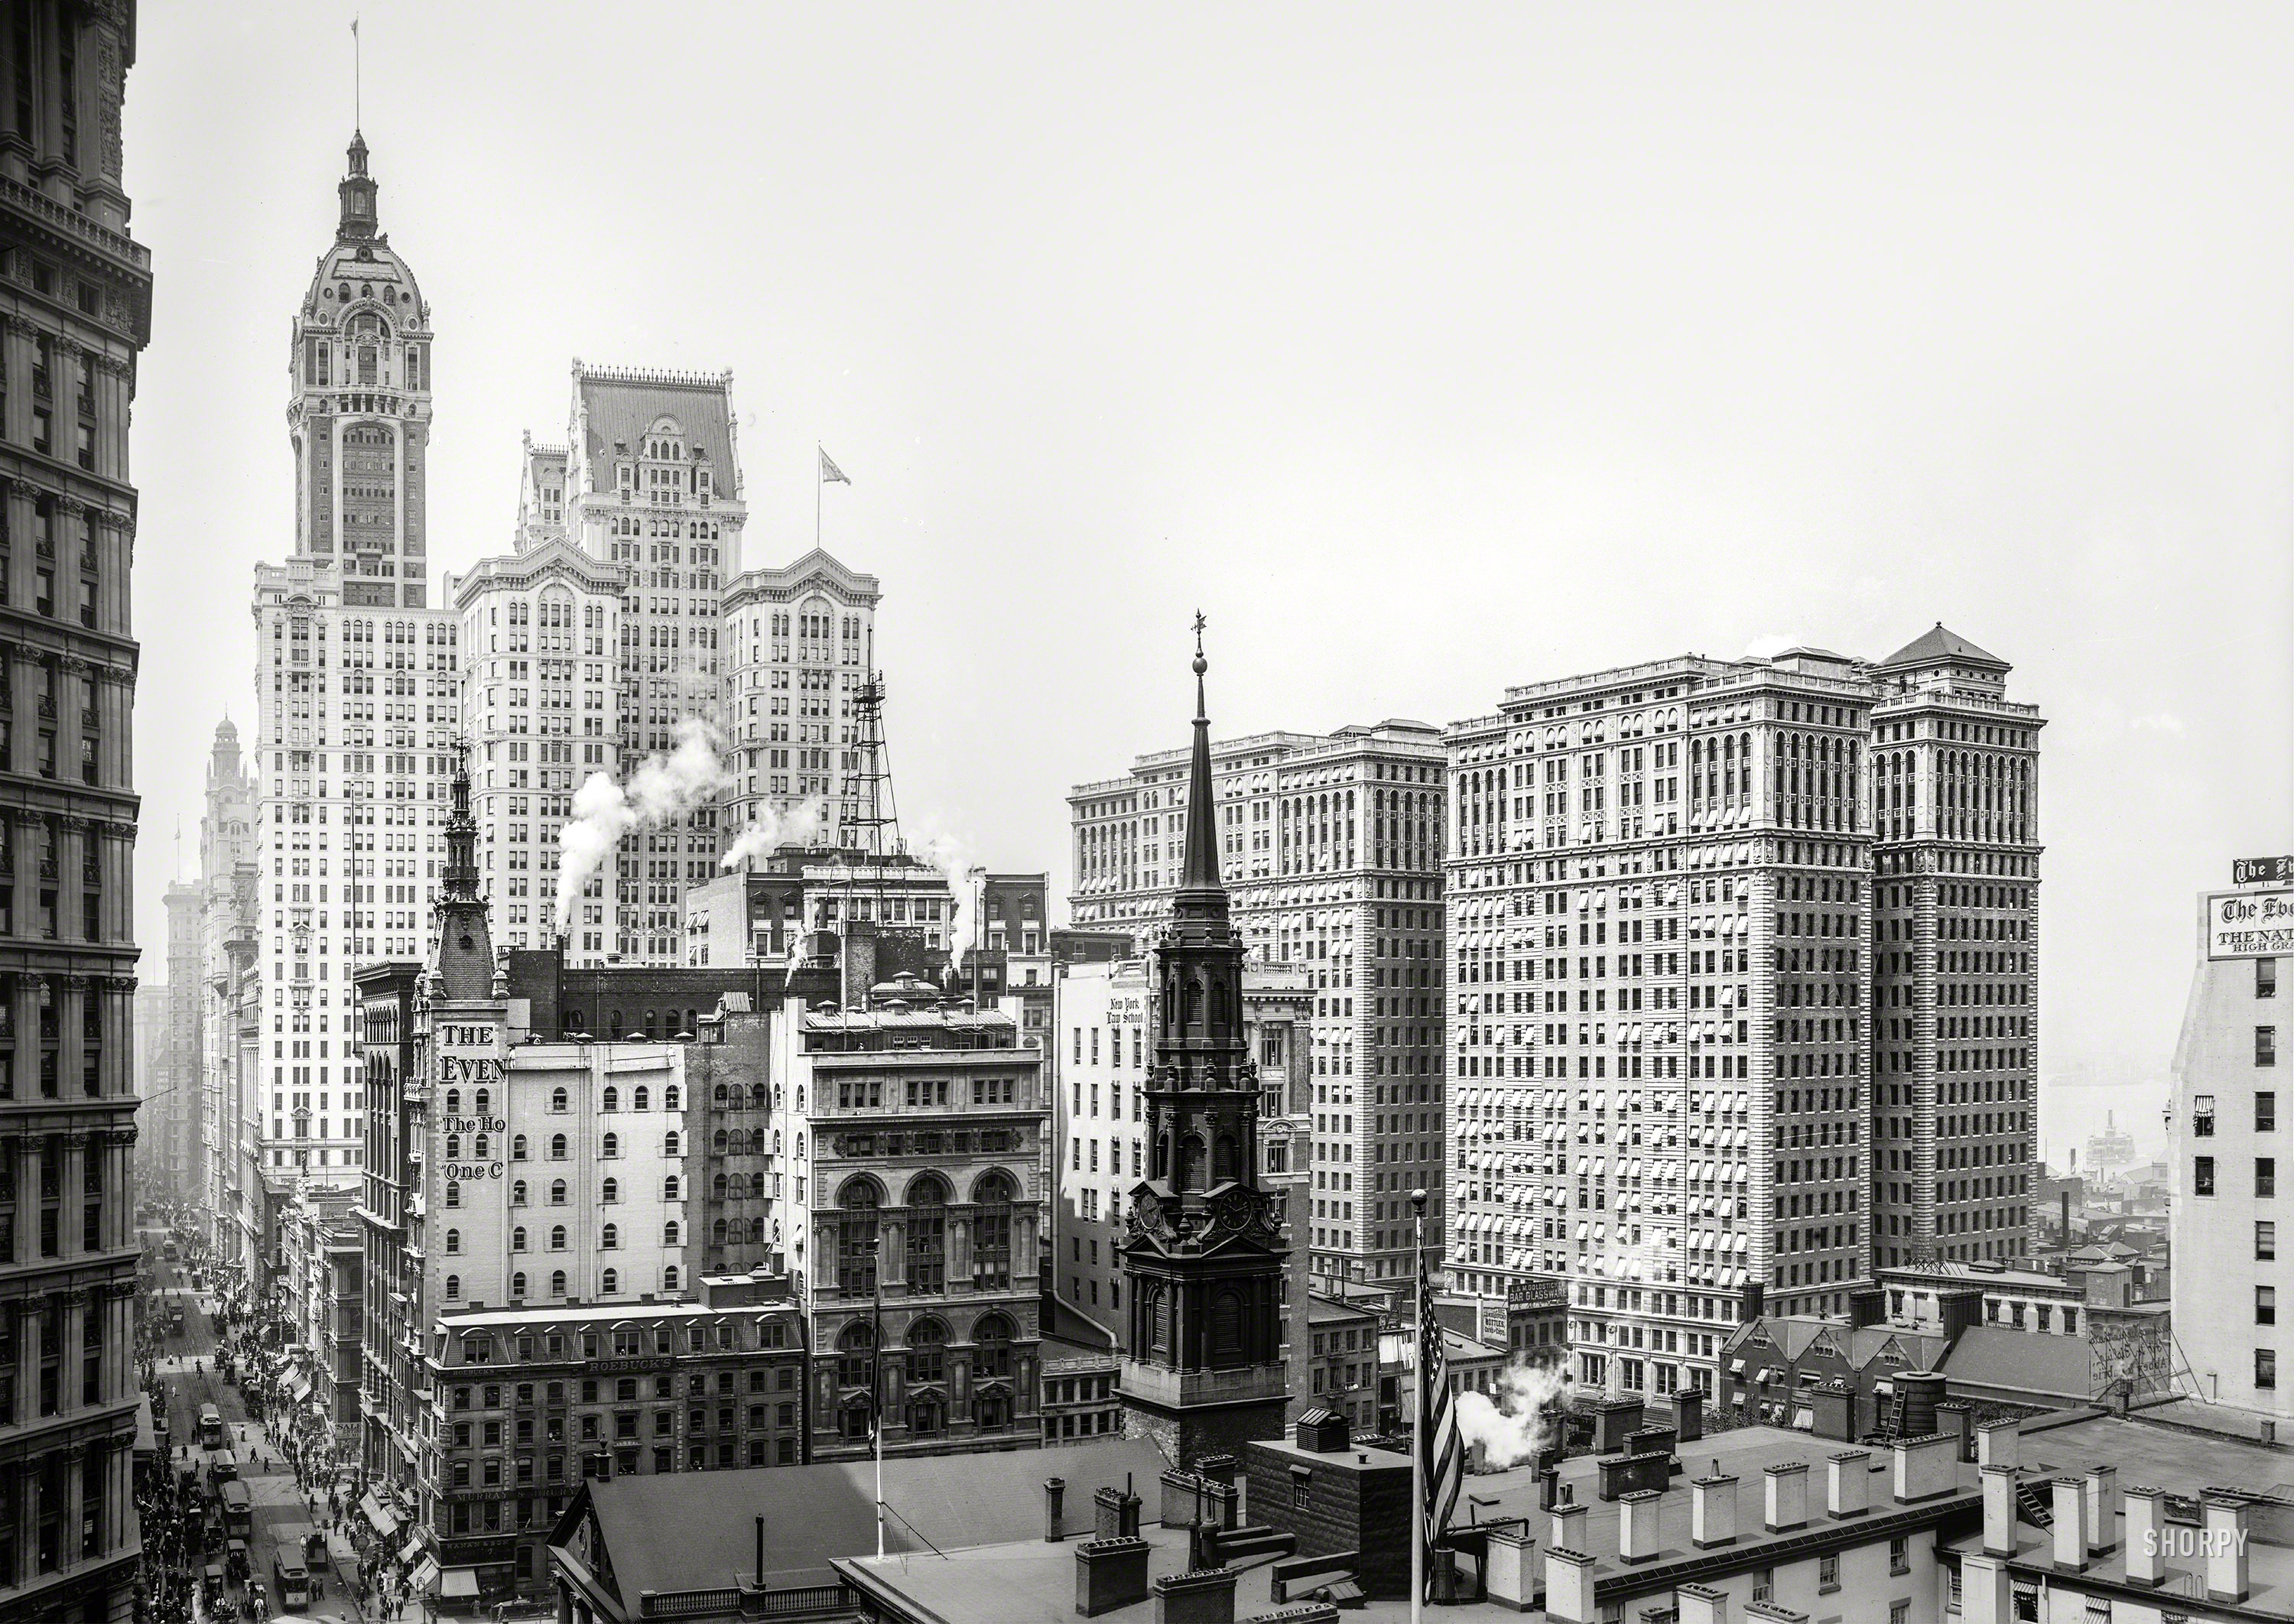 New York circa 1910. "Broadway and St. Paul's Chapel from the Post Office. Singer, City Investing and Hudson Terminal Buildings." With at least one windowsill milk bottle. Panorama made from two 8x10 inch glass negatives. View full size.